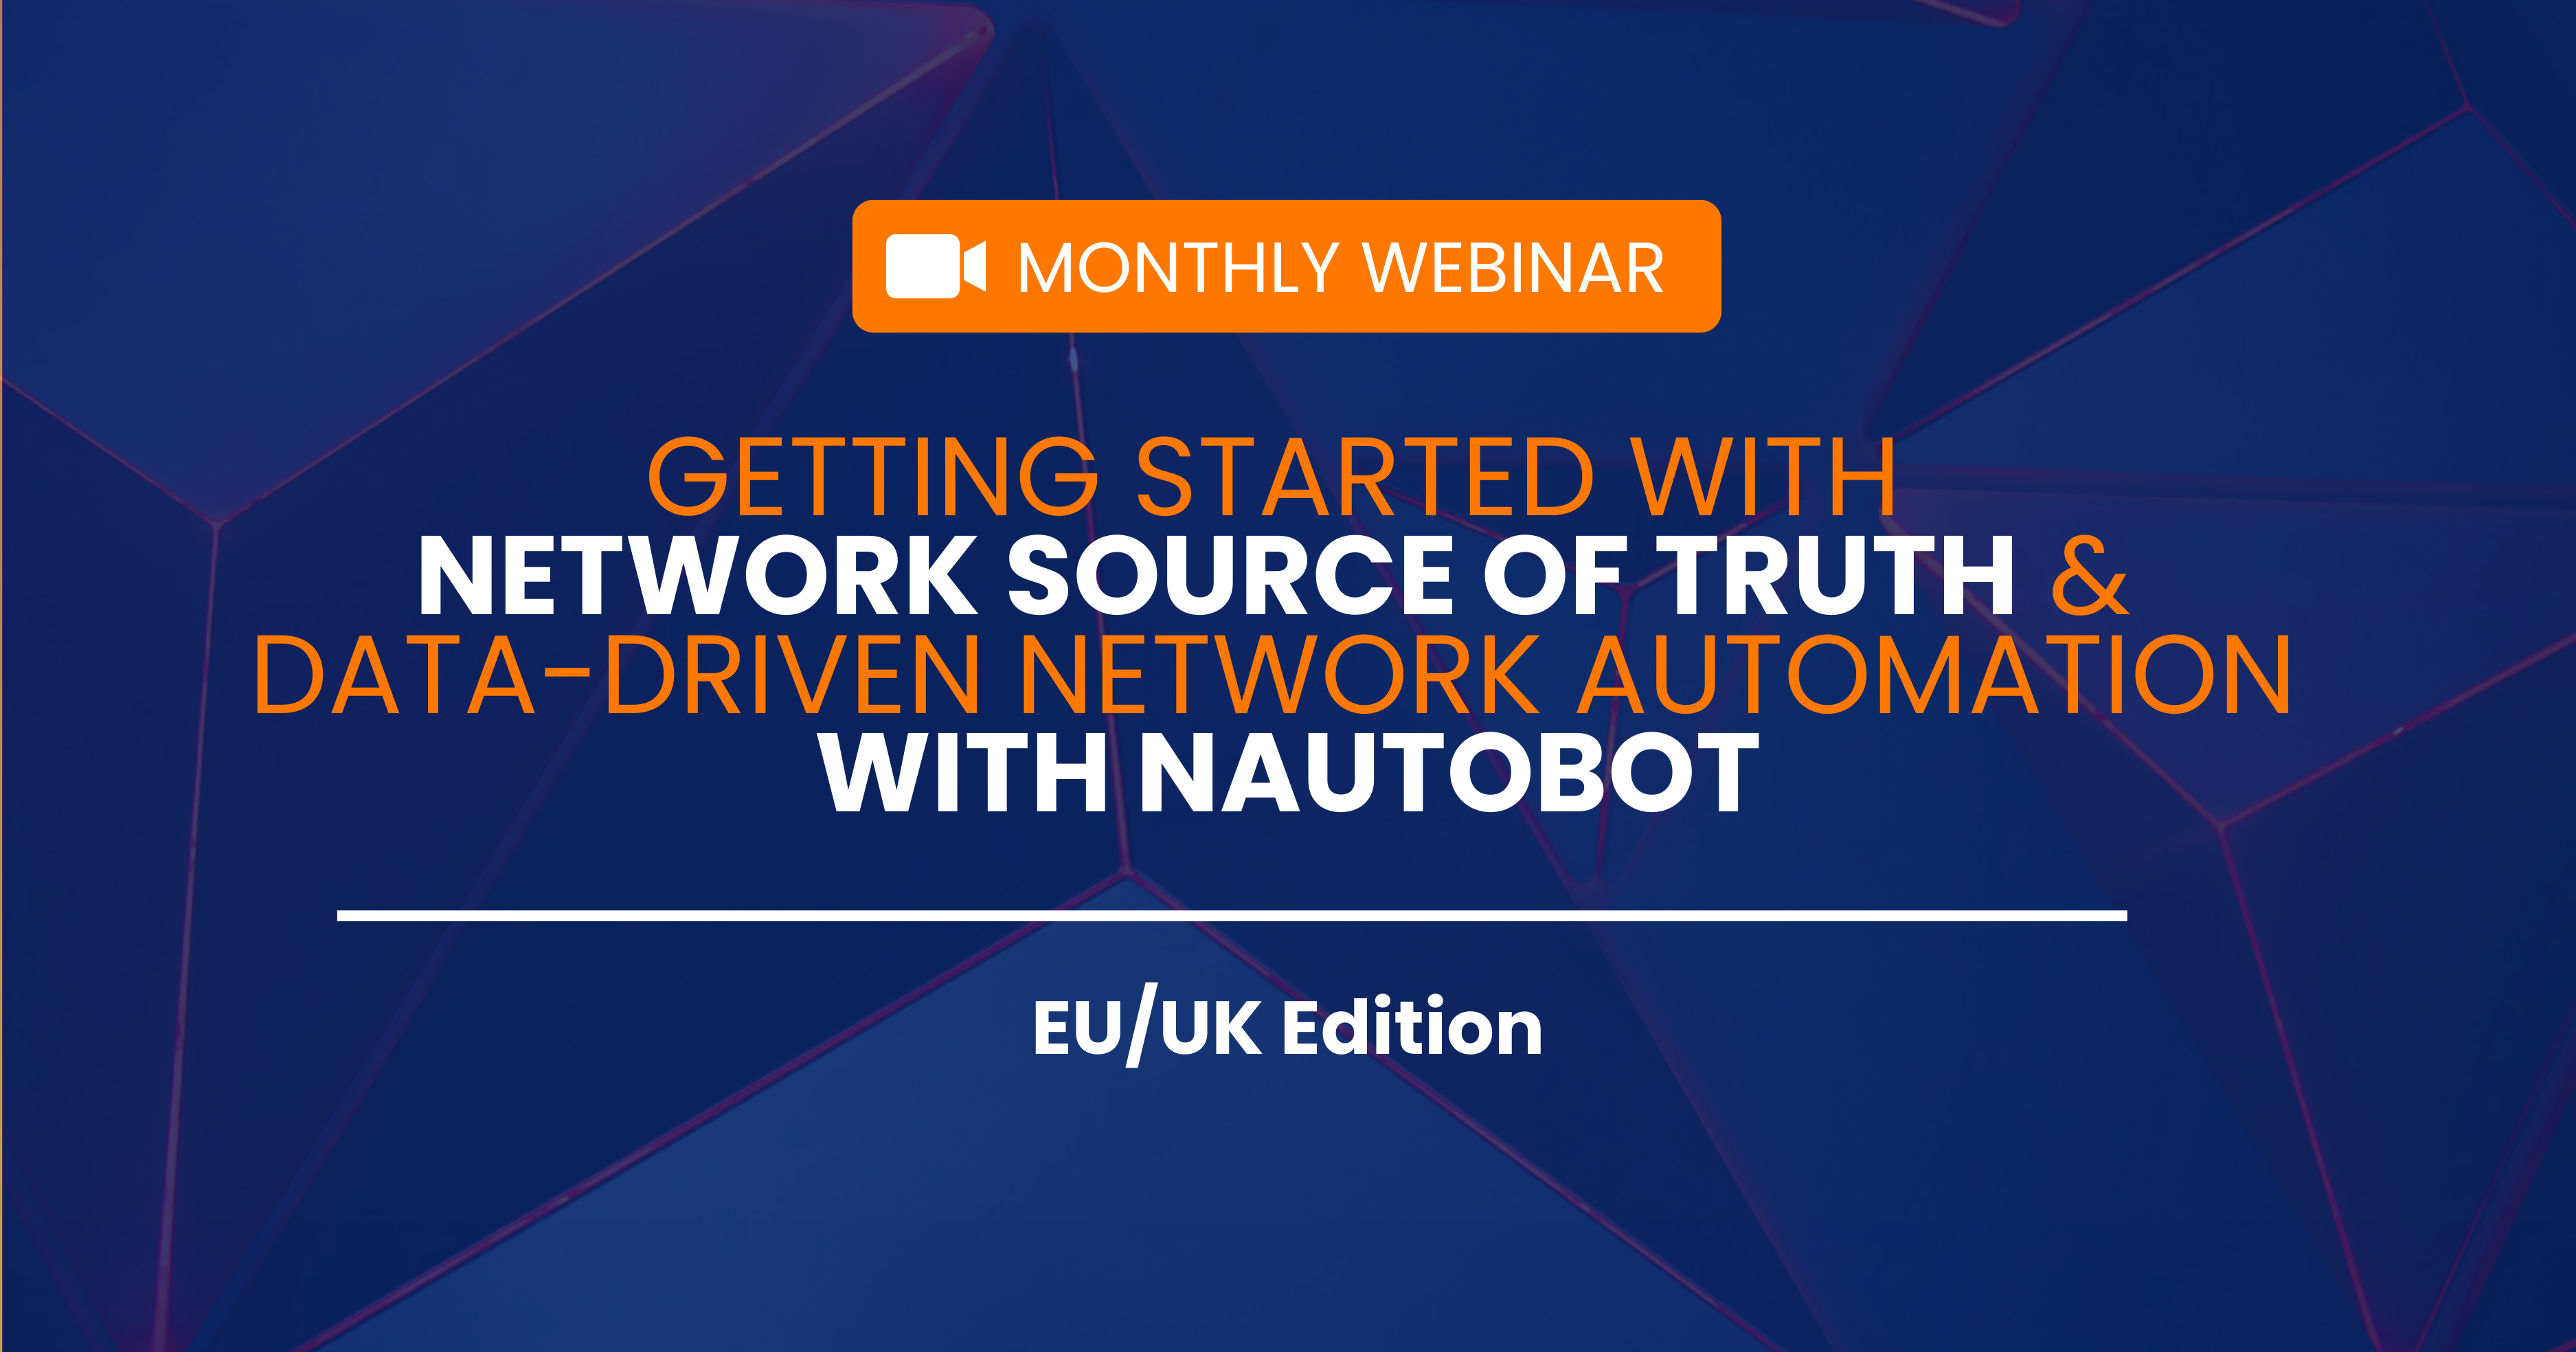 EU/UK Edition: Getting Started with Network Source of Truth & Data-Driven Network Automation with Nautobot